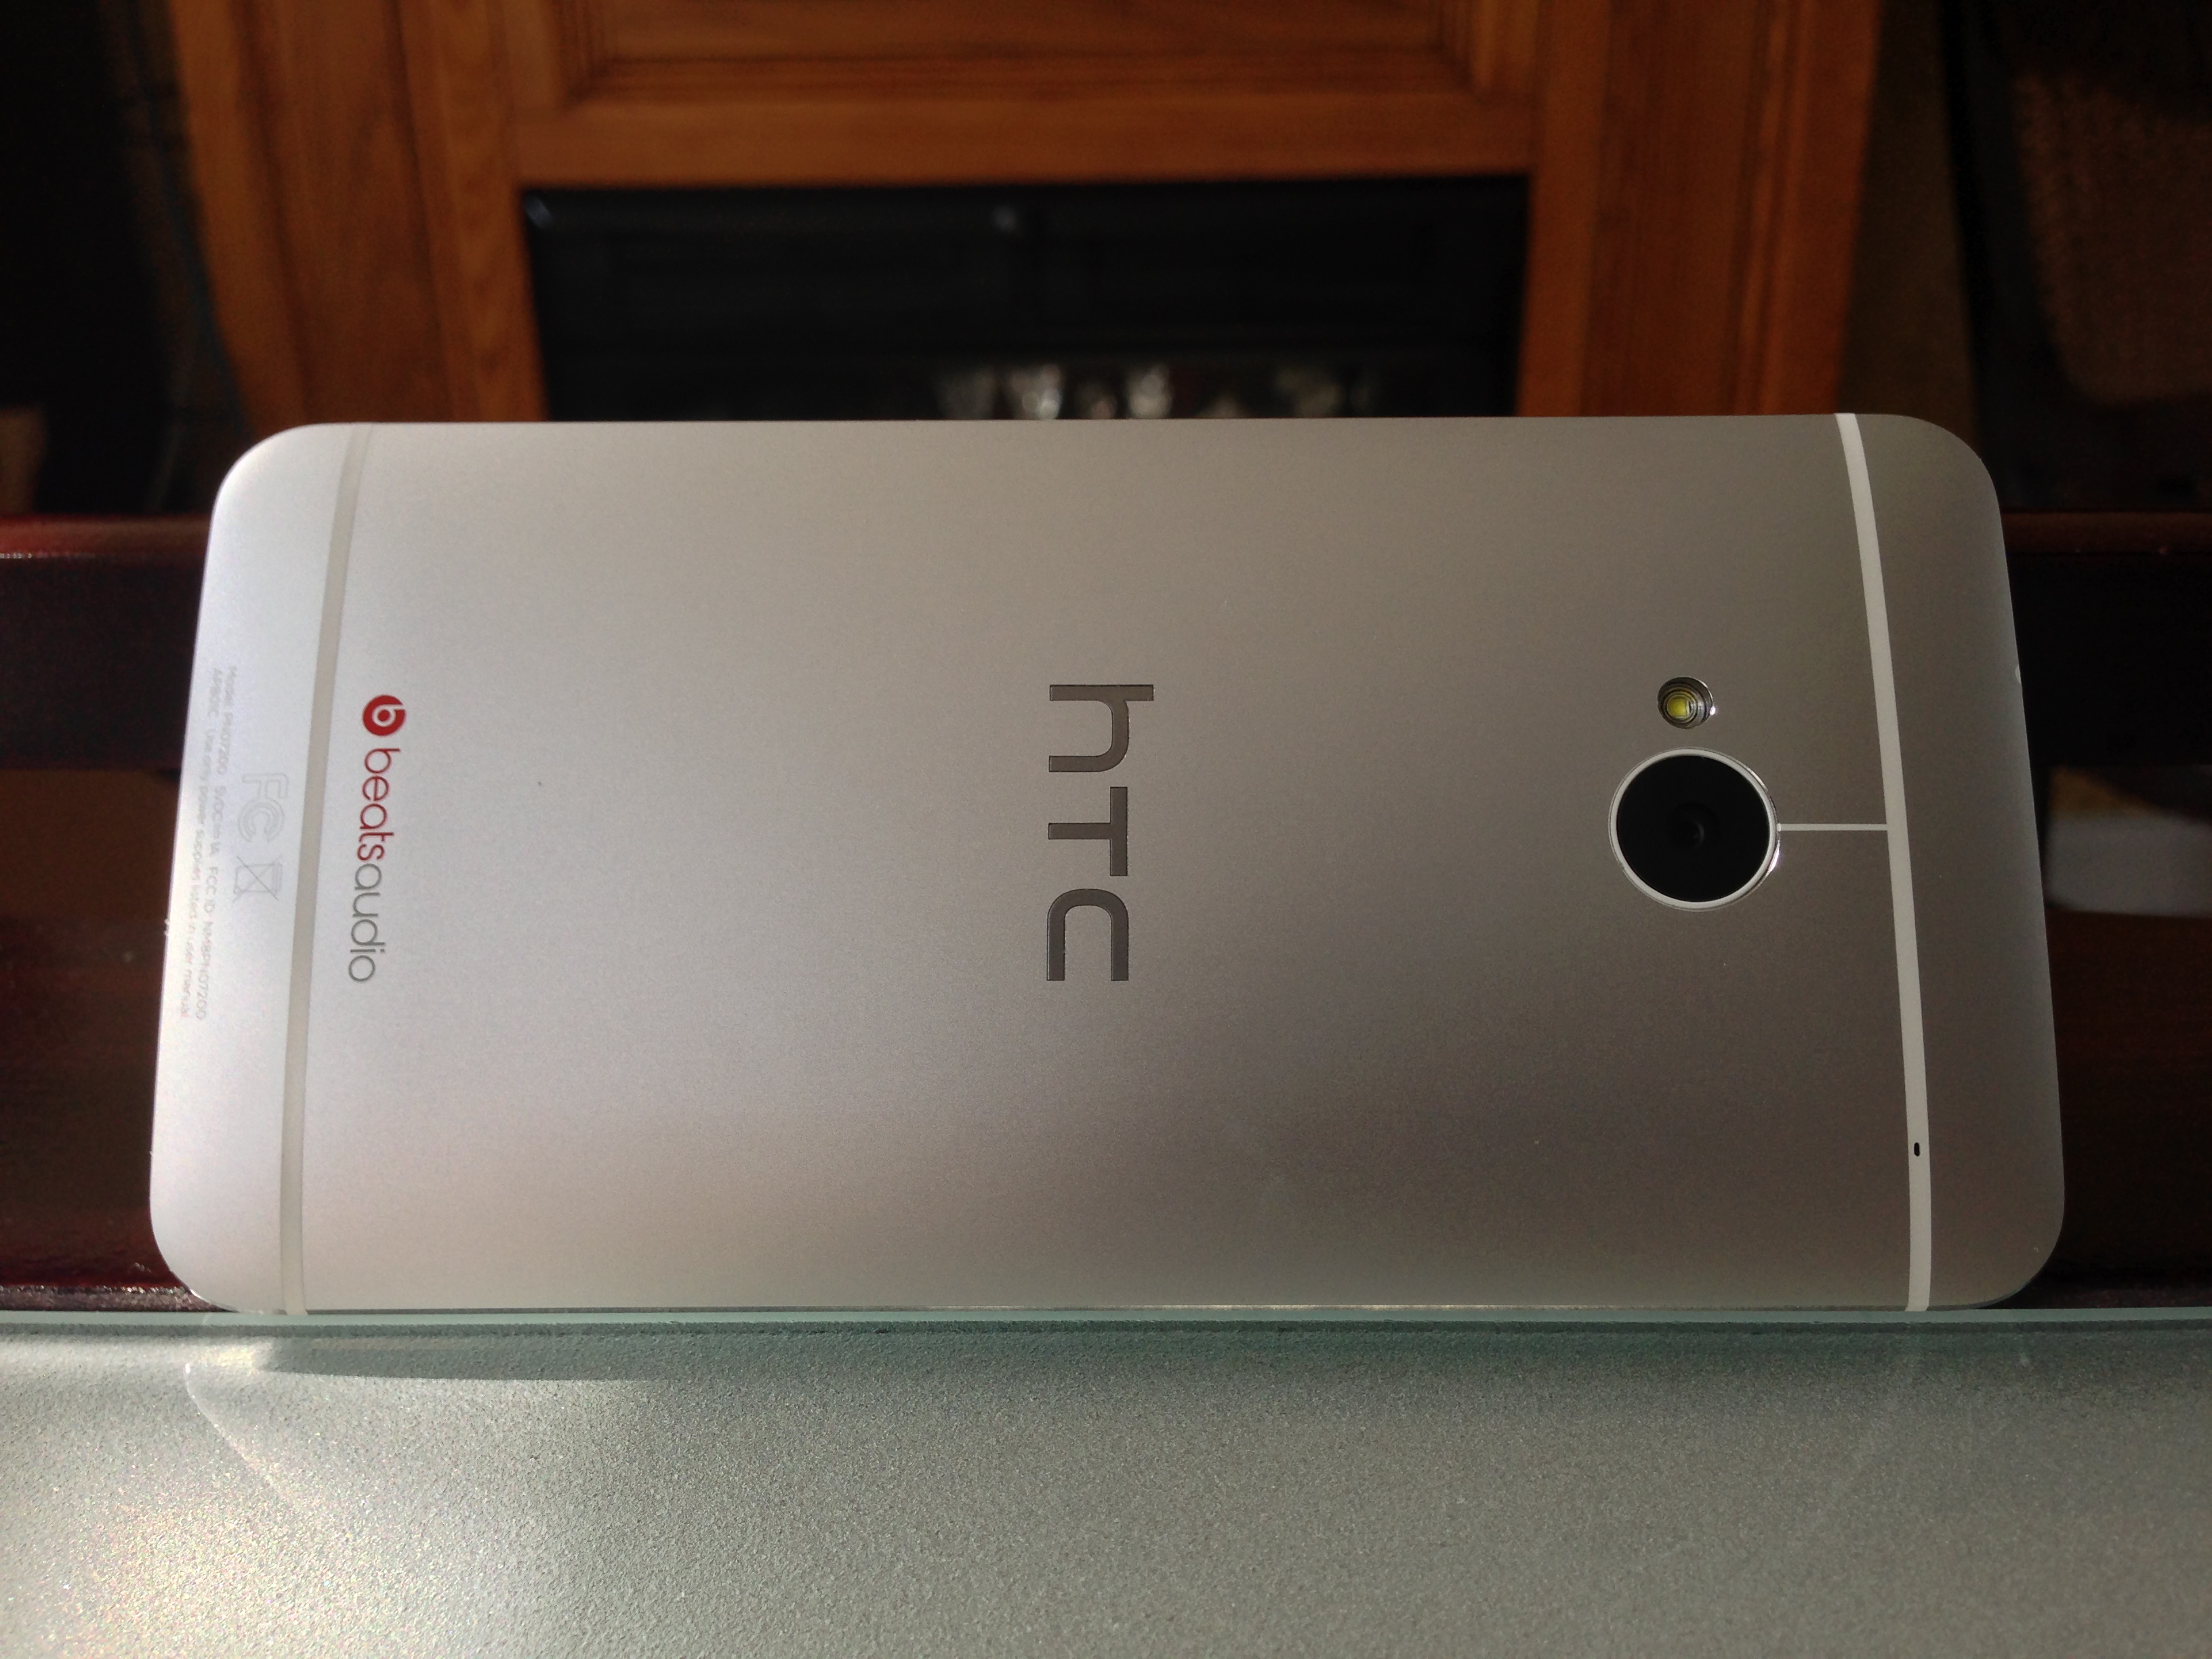 Verniel Zeker vee HTC One, reviewed: a standout, breathtaking Android phone for everyone